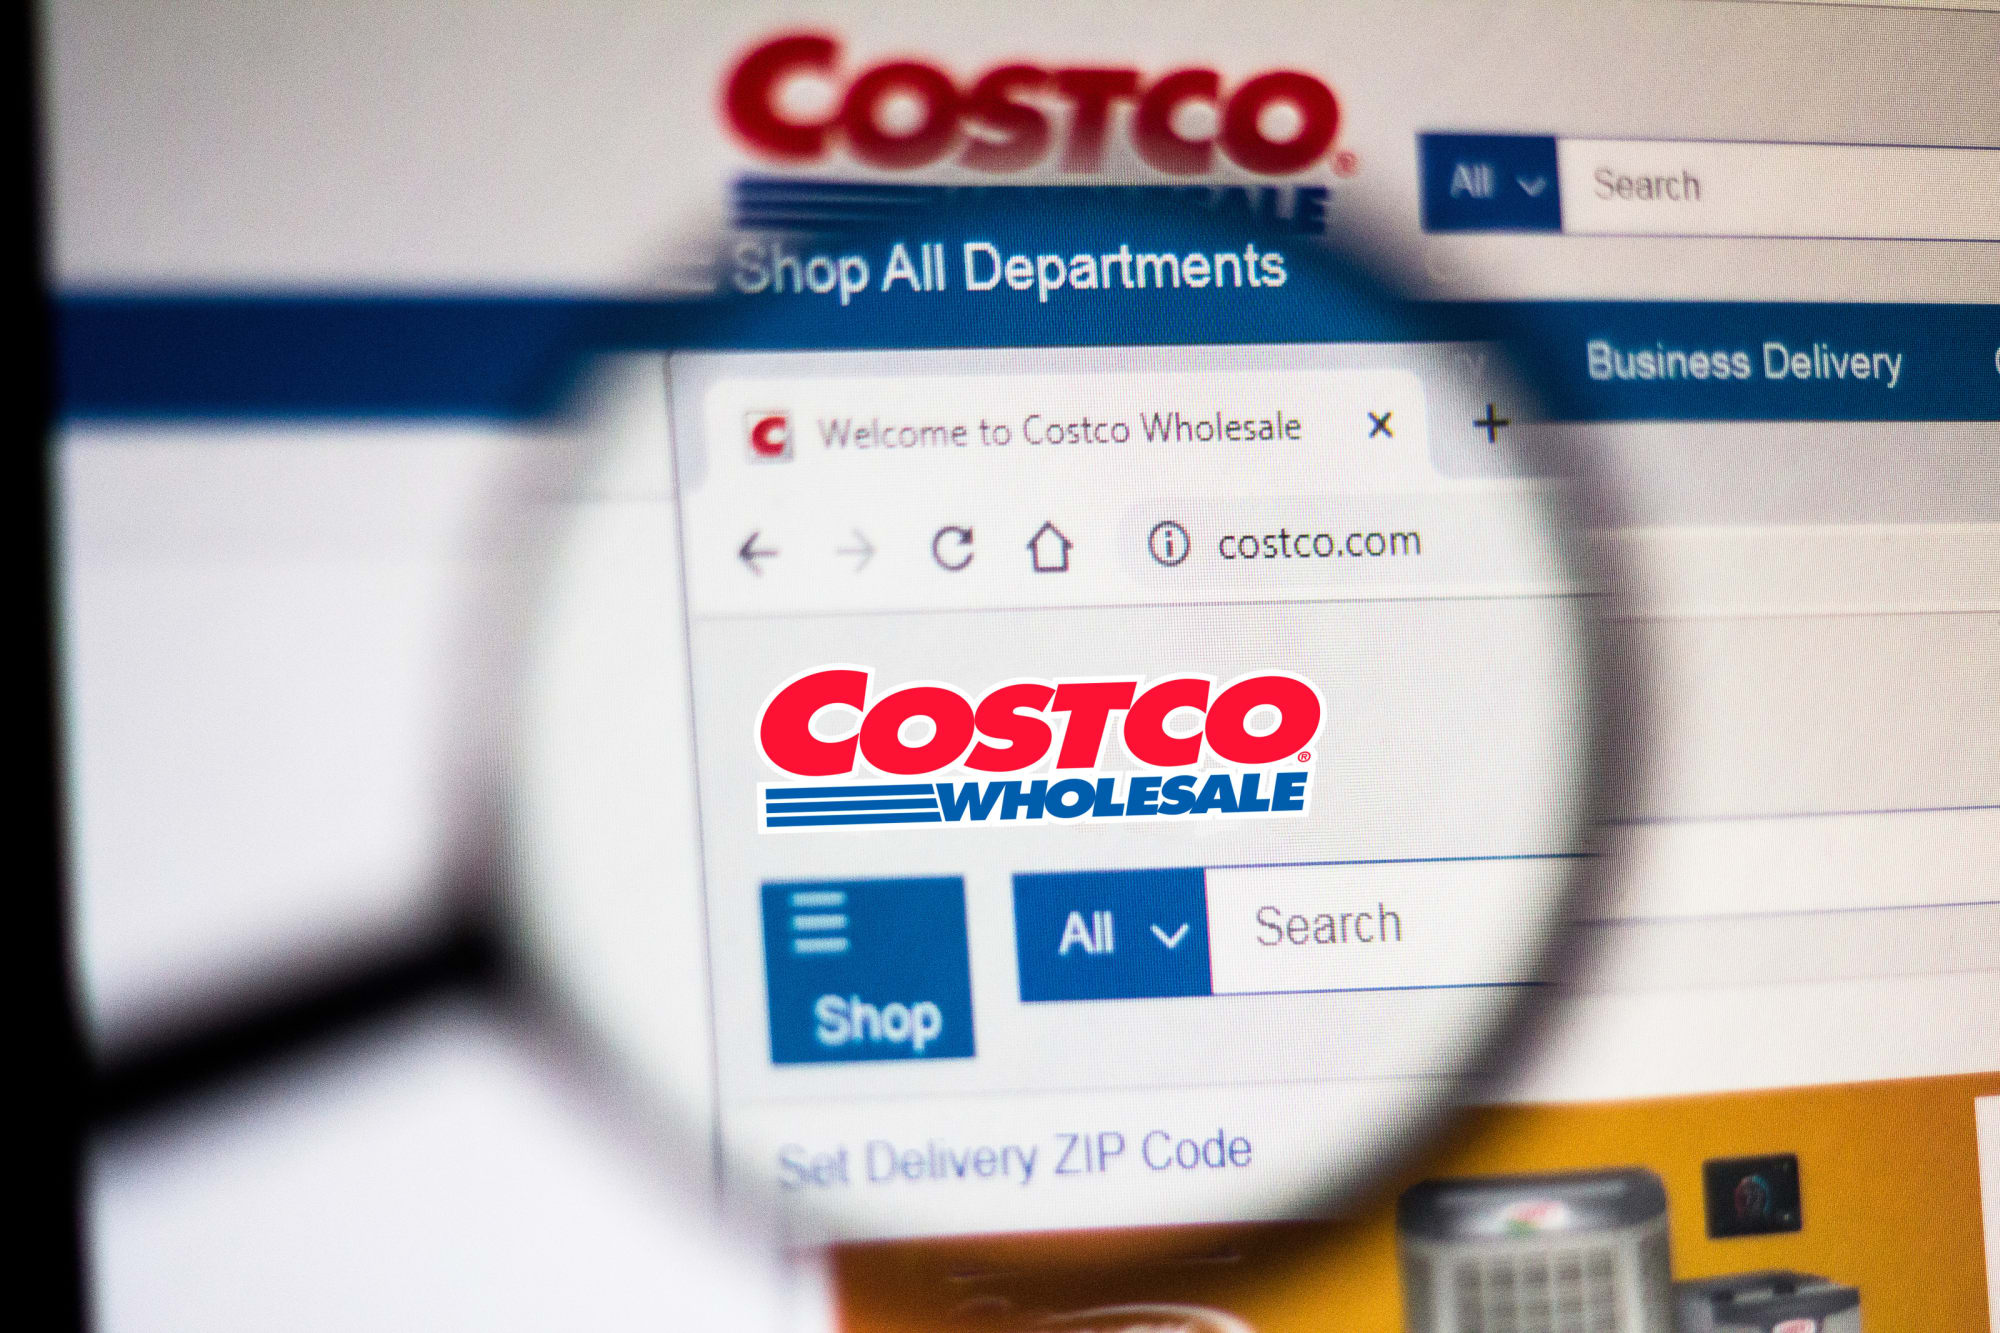 Is Costco open on Black Friday?